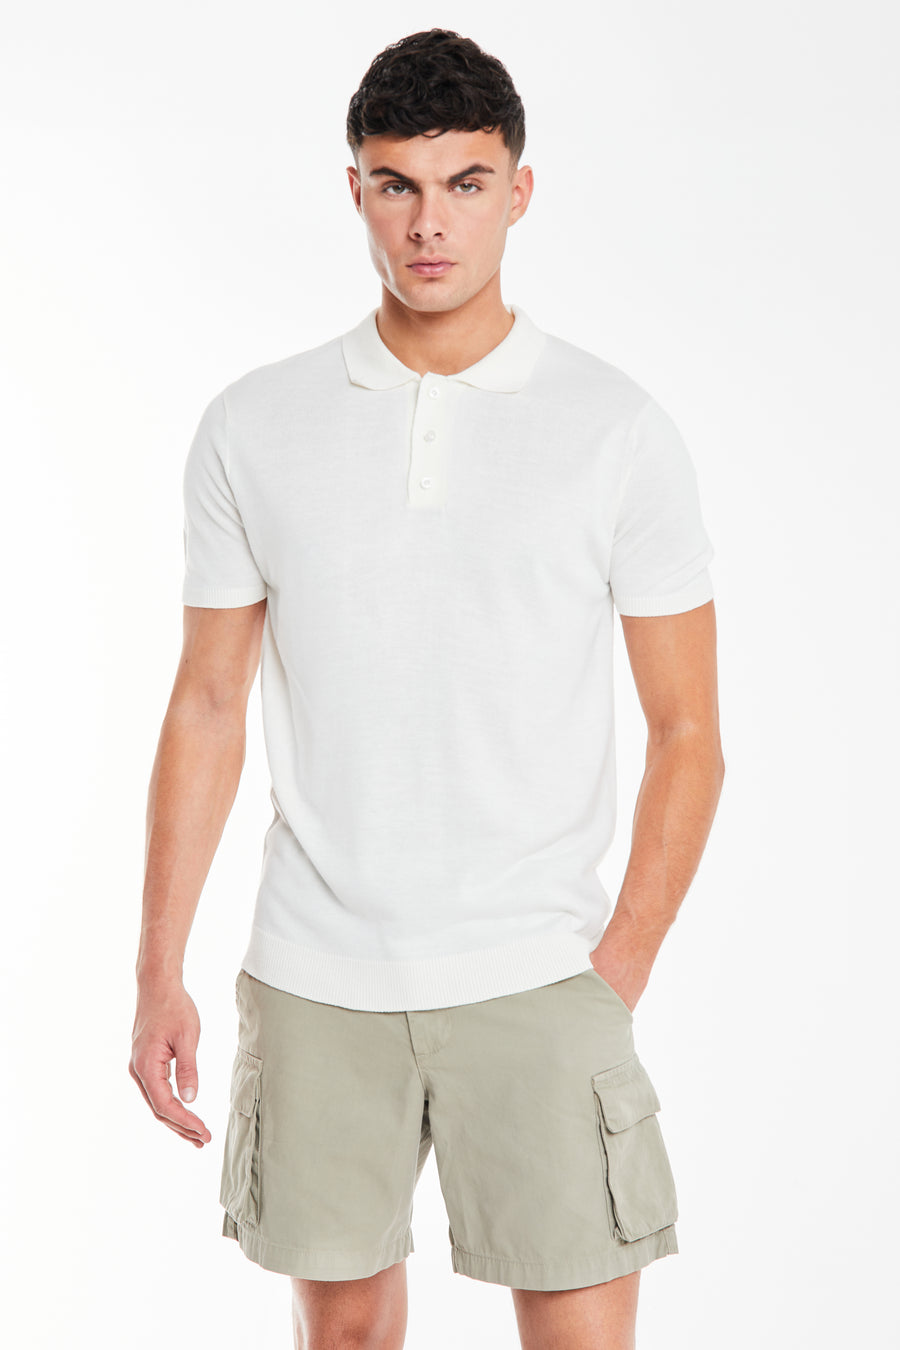 men's utility shorts with two pockets styled with white polo